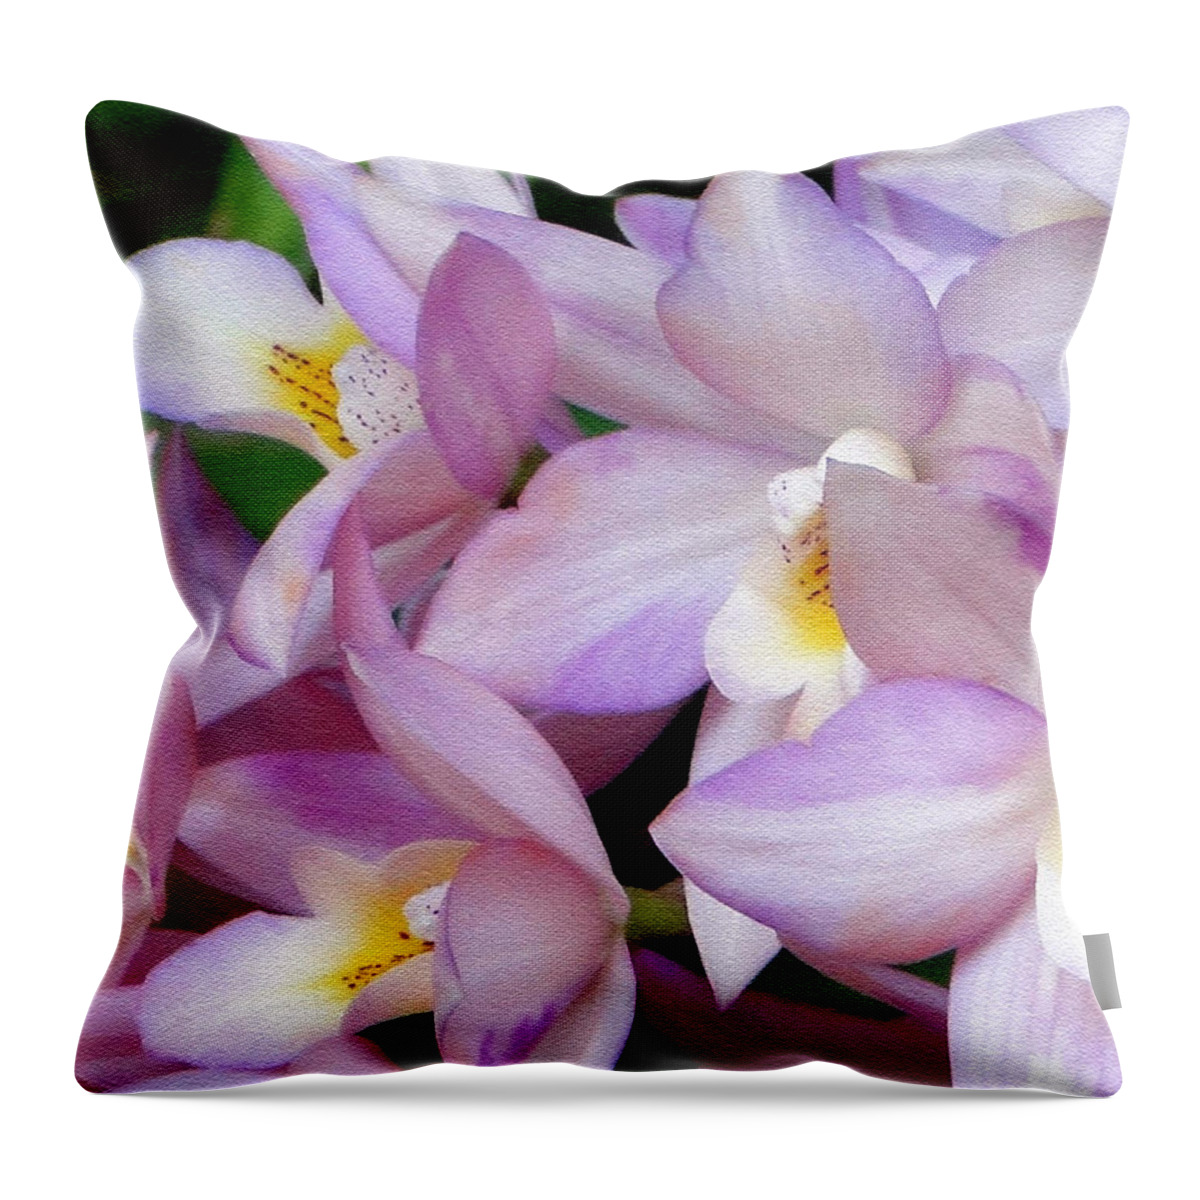 Orchid Throw Pillow featuring the photograph Lovely Orchid Family by Sue Melvin